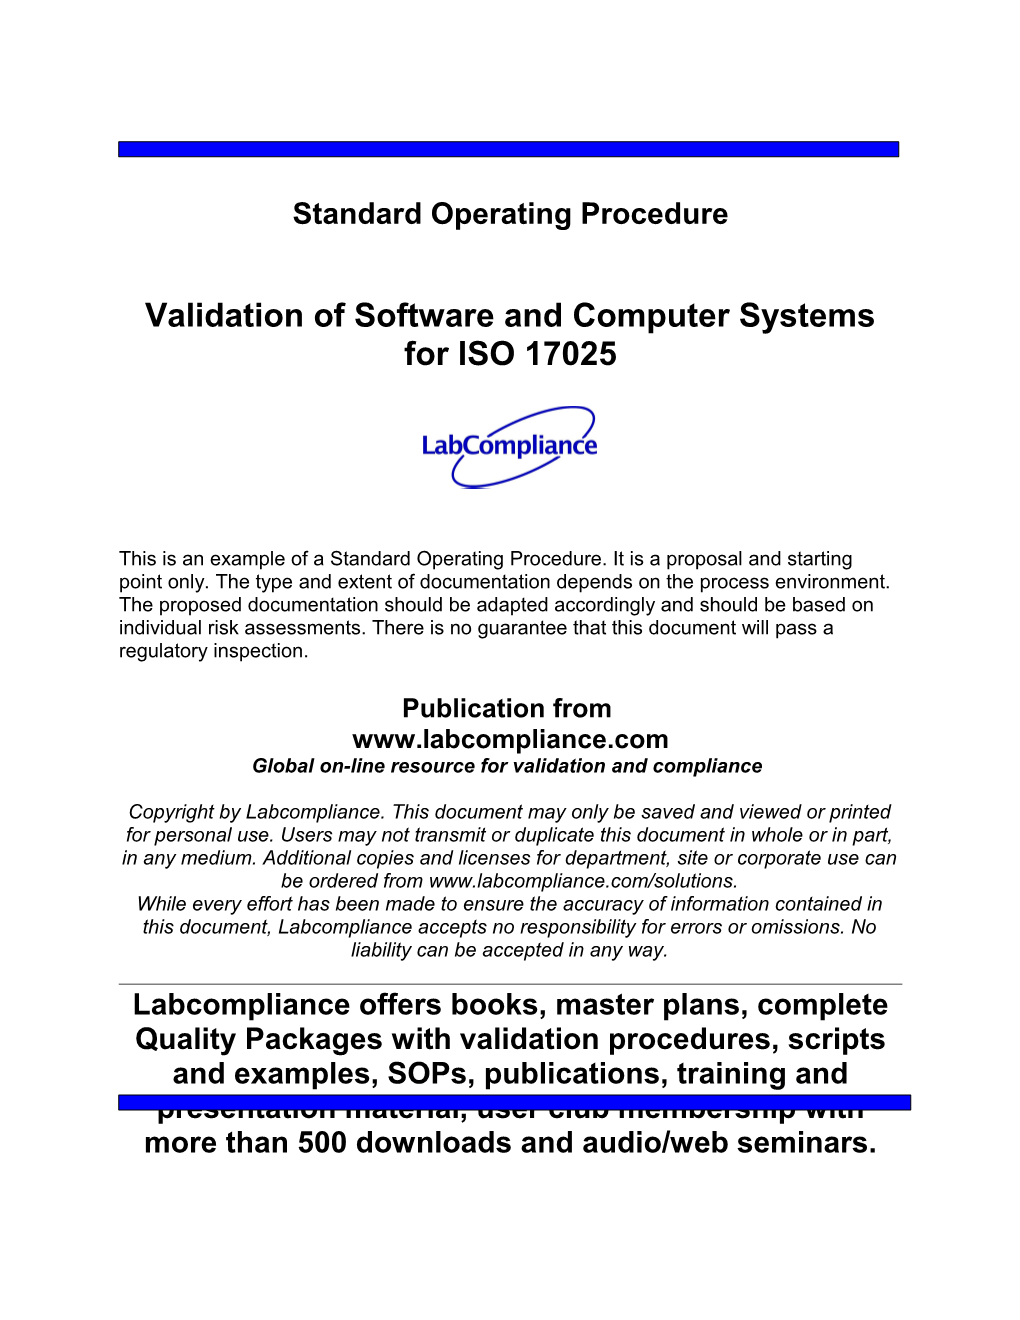 Validation of Software and Computer Systems for ISO 17025